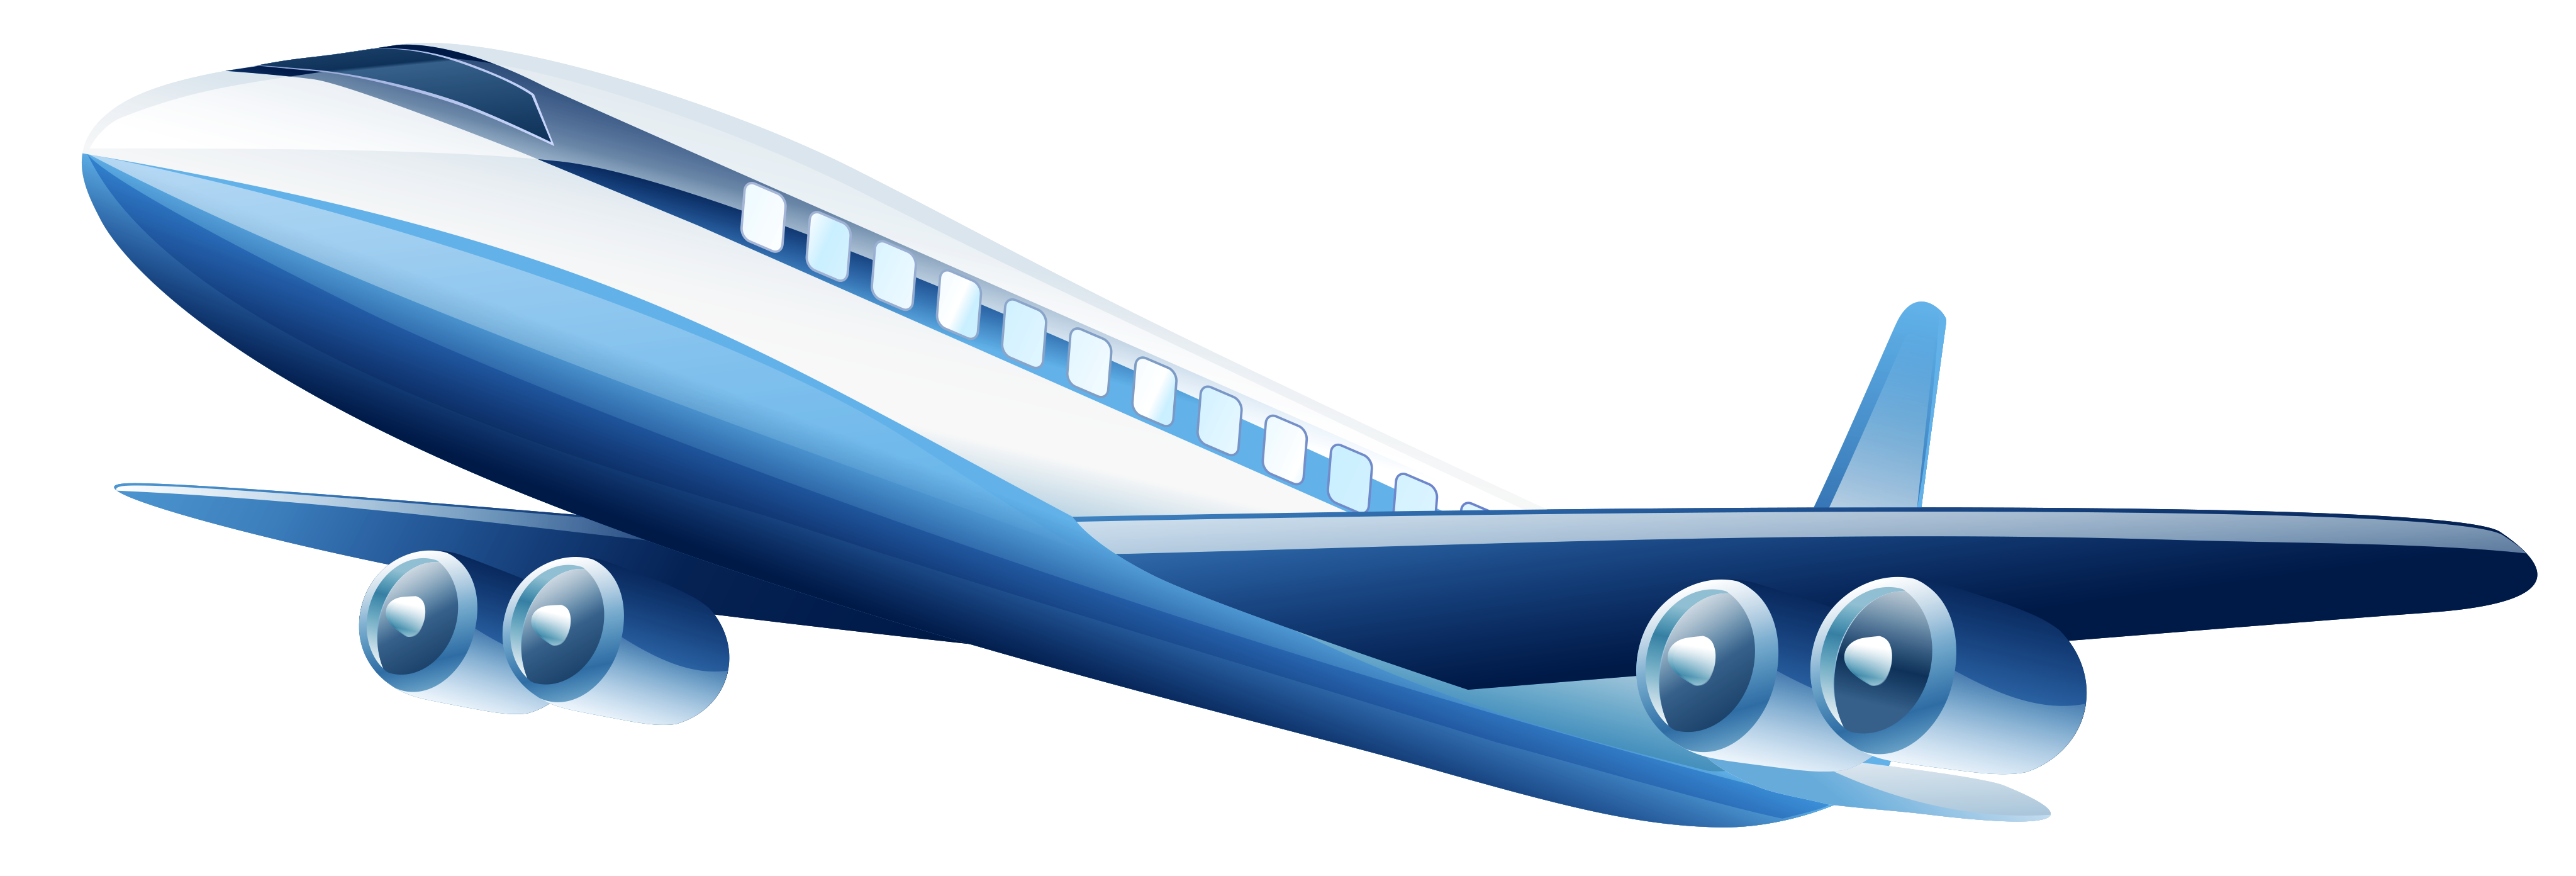 Airplane Png Image   Plane Png - Planes, Transparent background PNG HD thumbnail